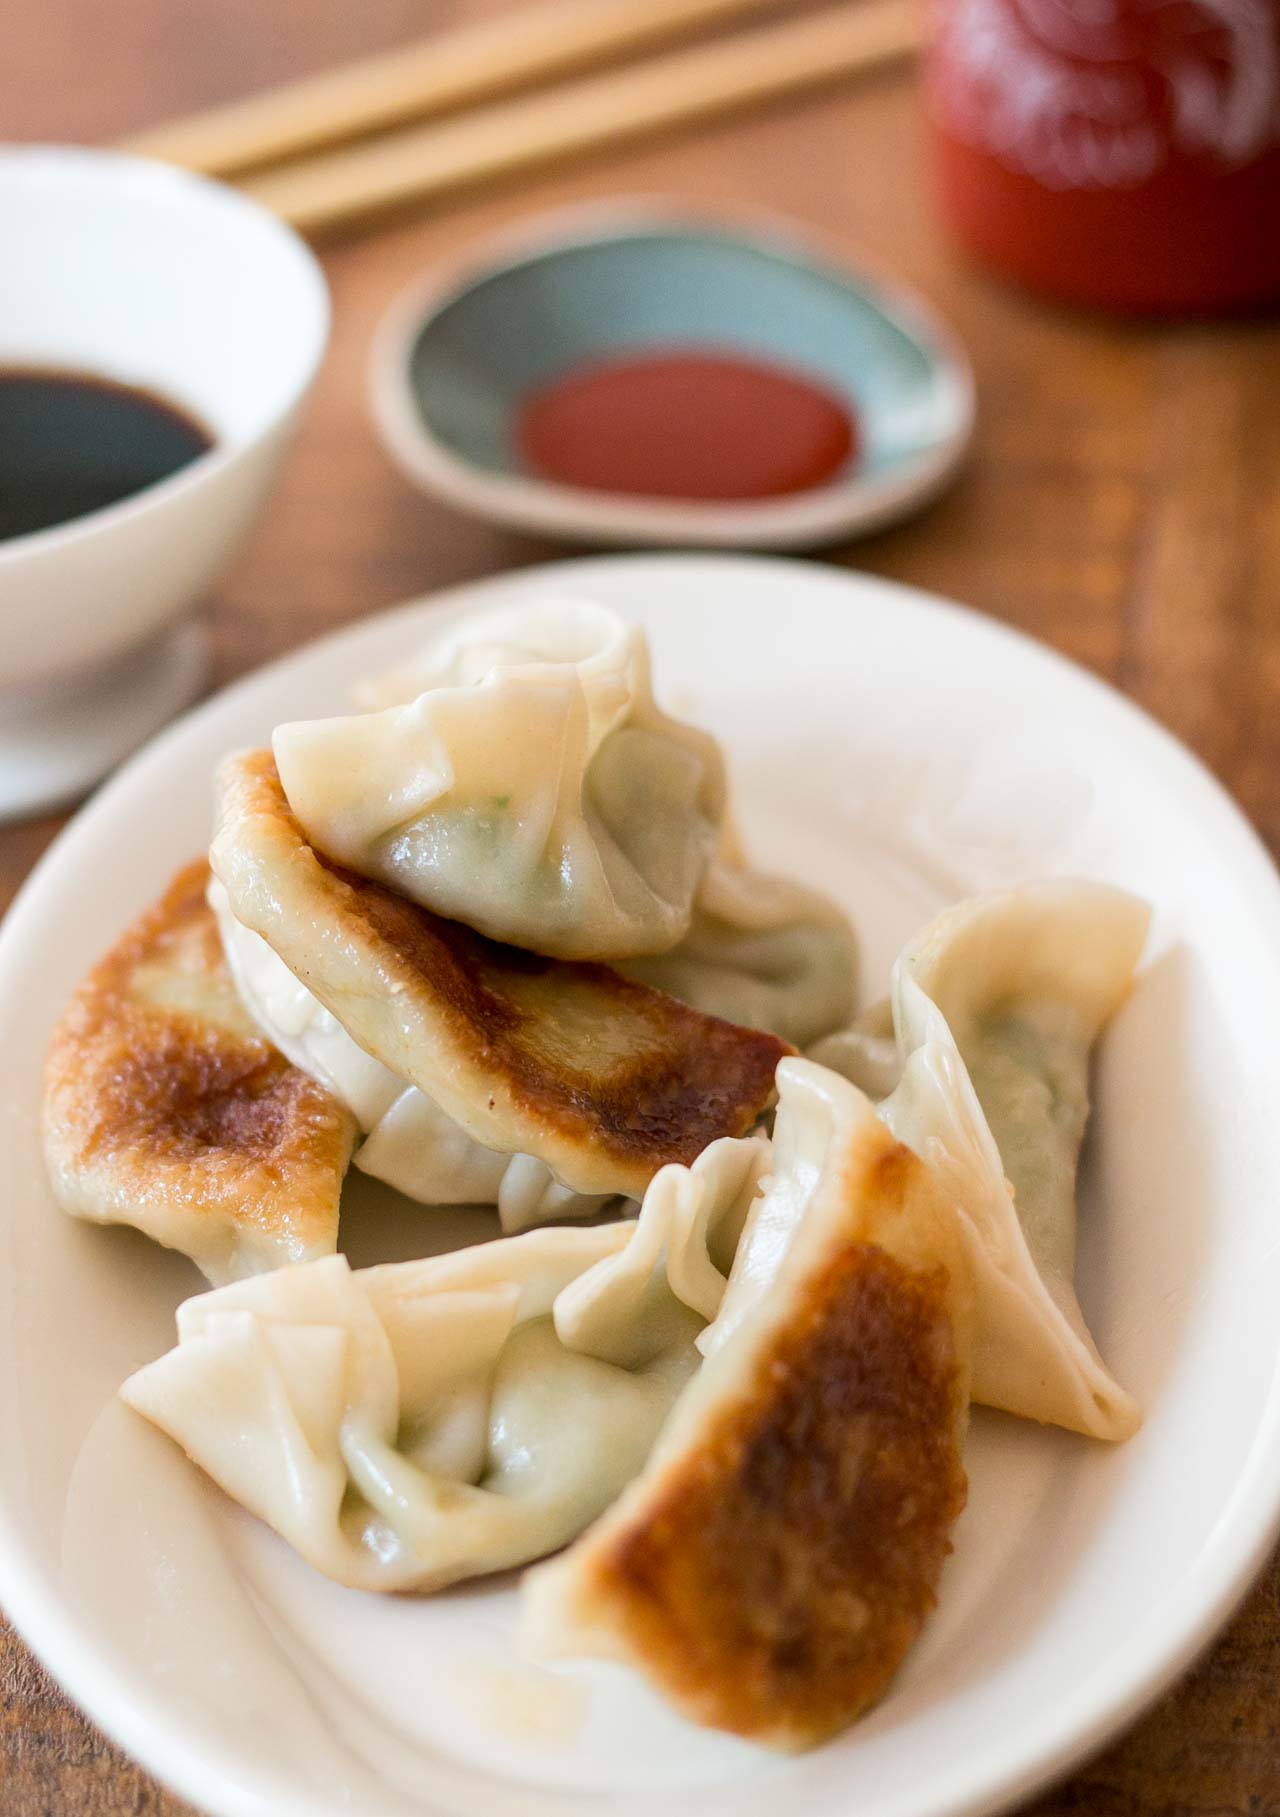 Pot Stickers Recipe - Tasty Ever After